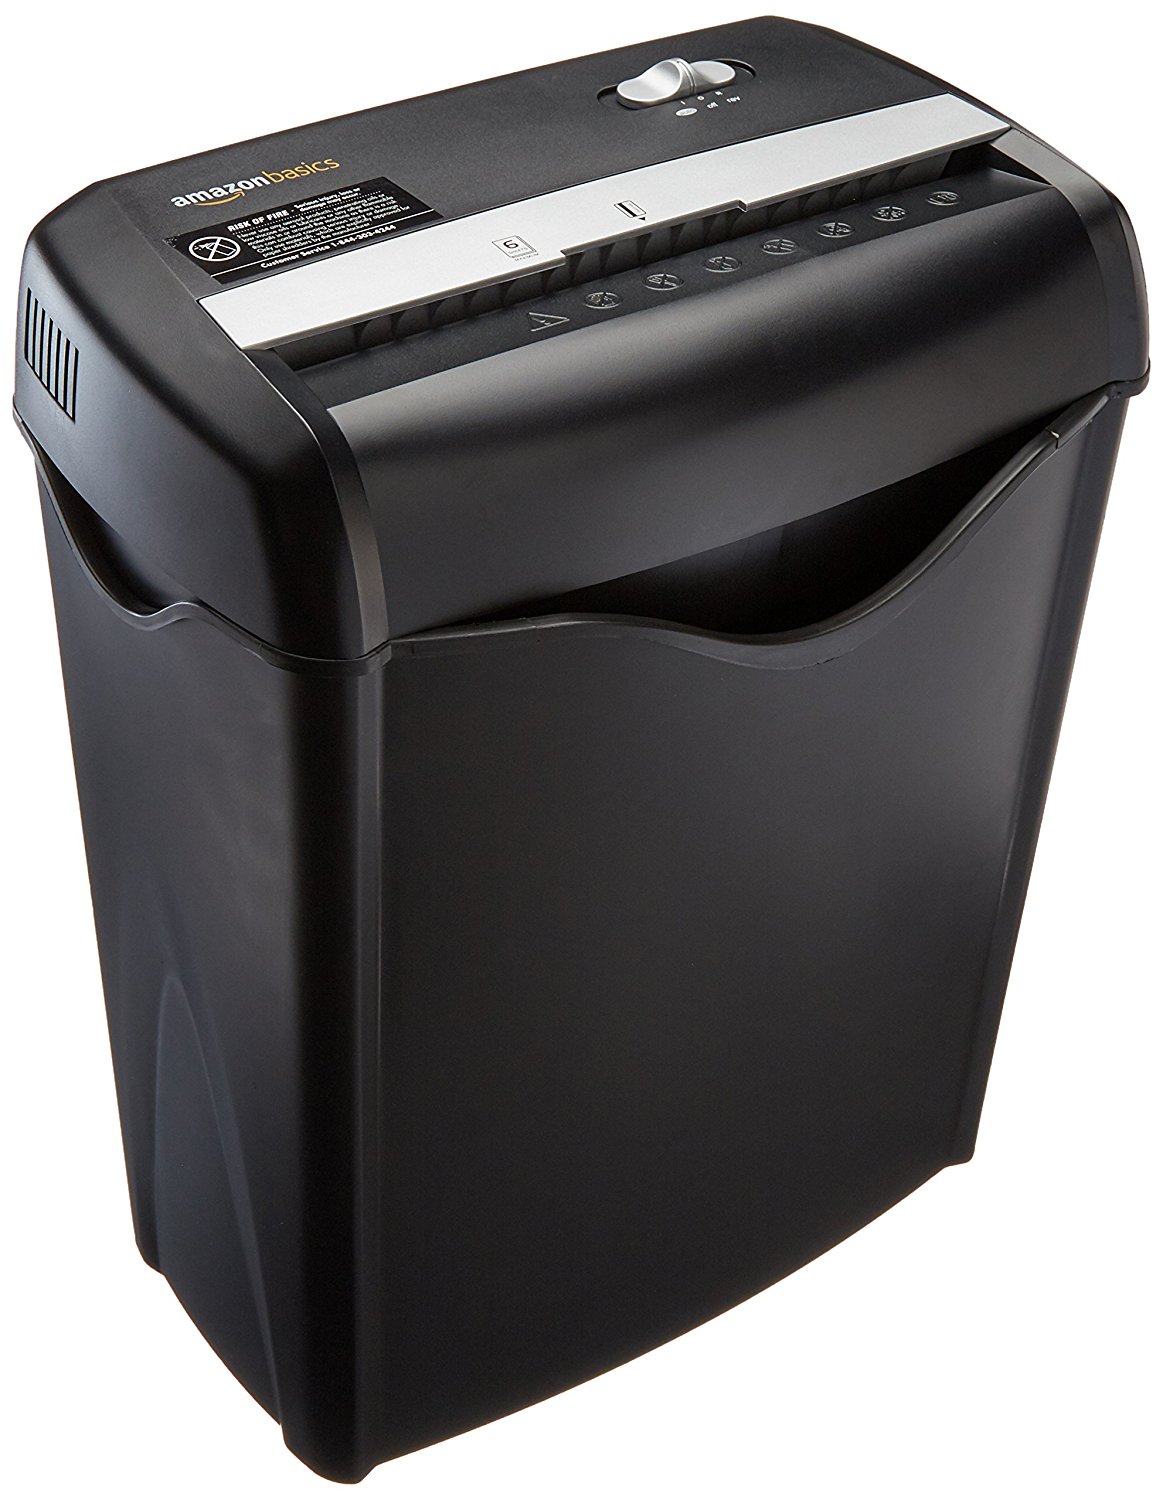 AmazonBascis 6 Sheet Cross-Cut Paper and Credit Card Shredder Only $23.74 Shipped!